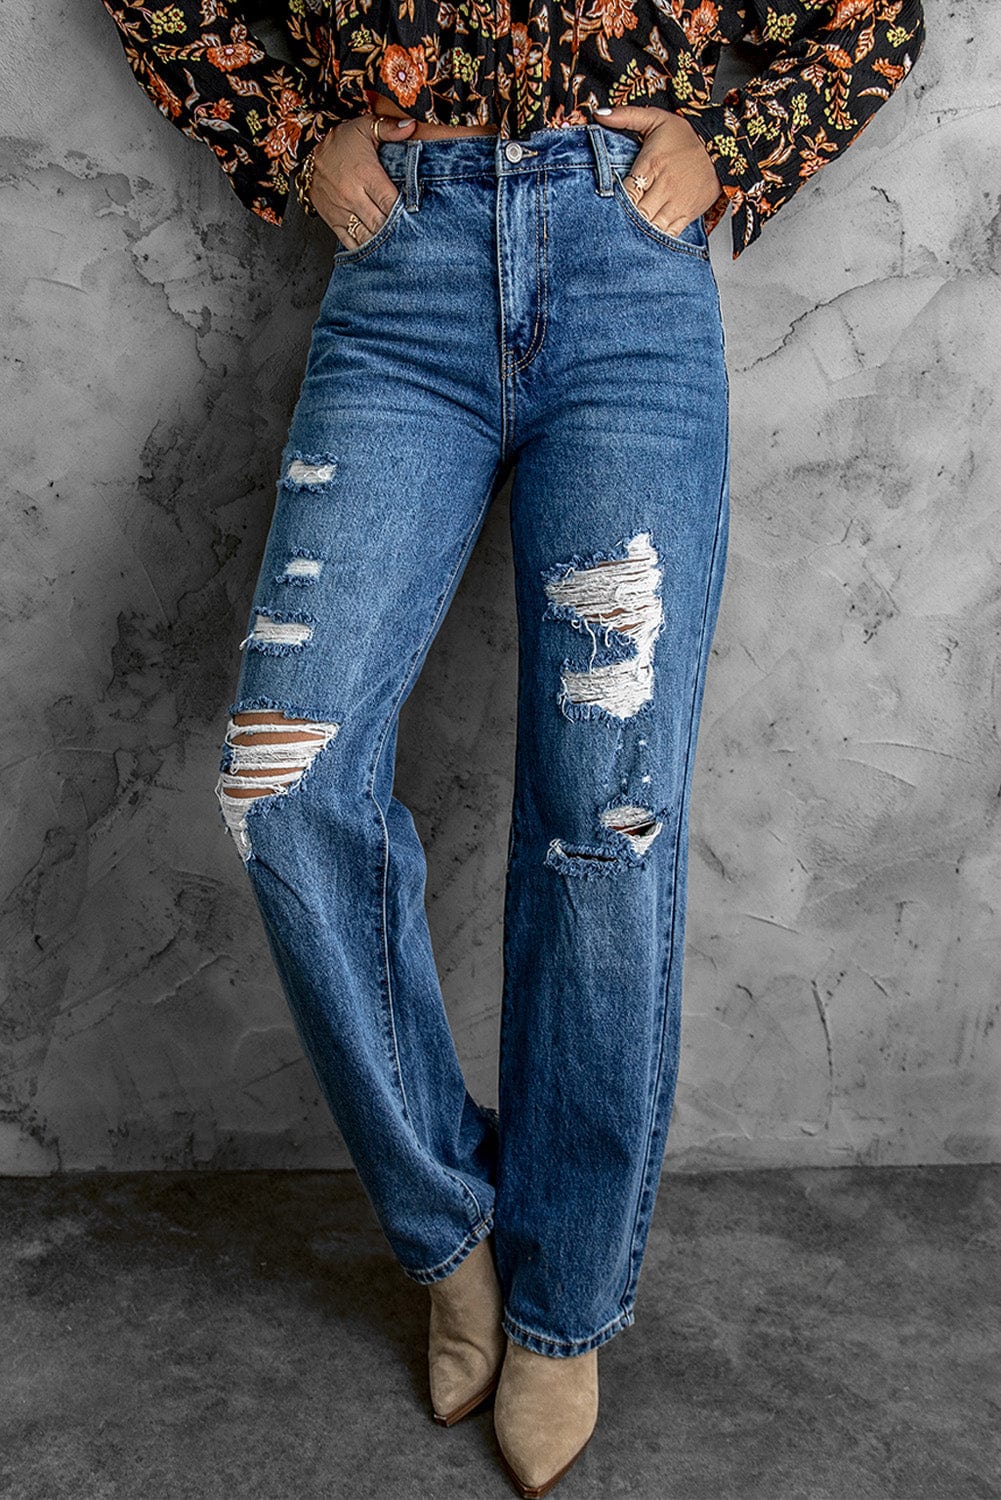 Distressed High Waist Jeans with Pockets